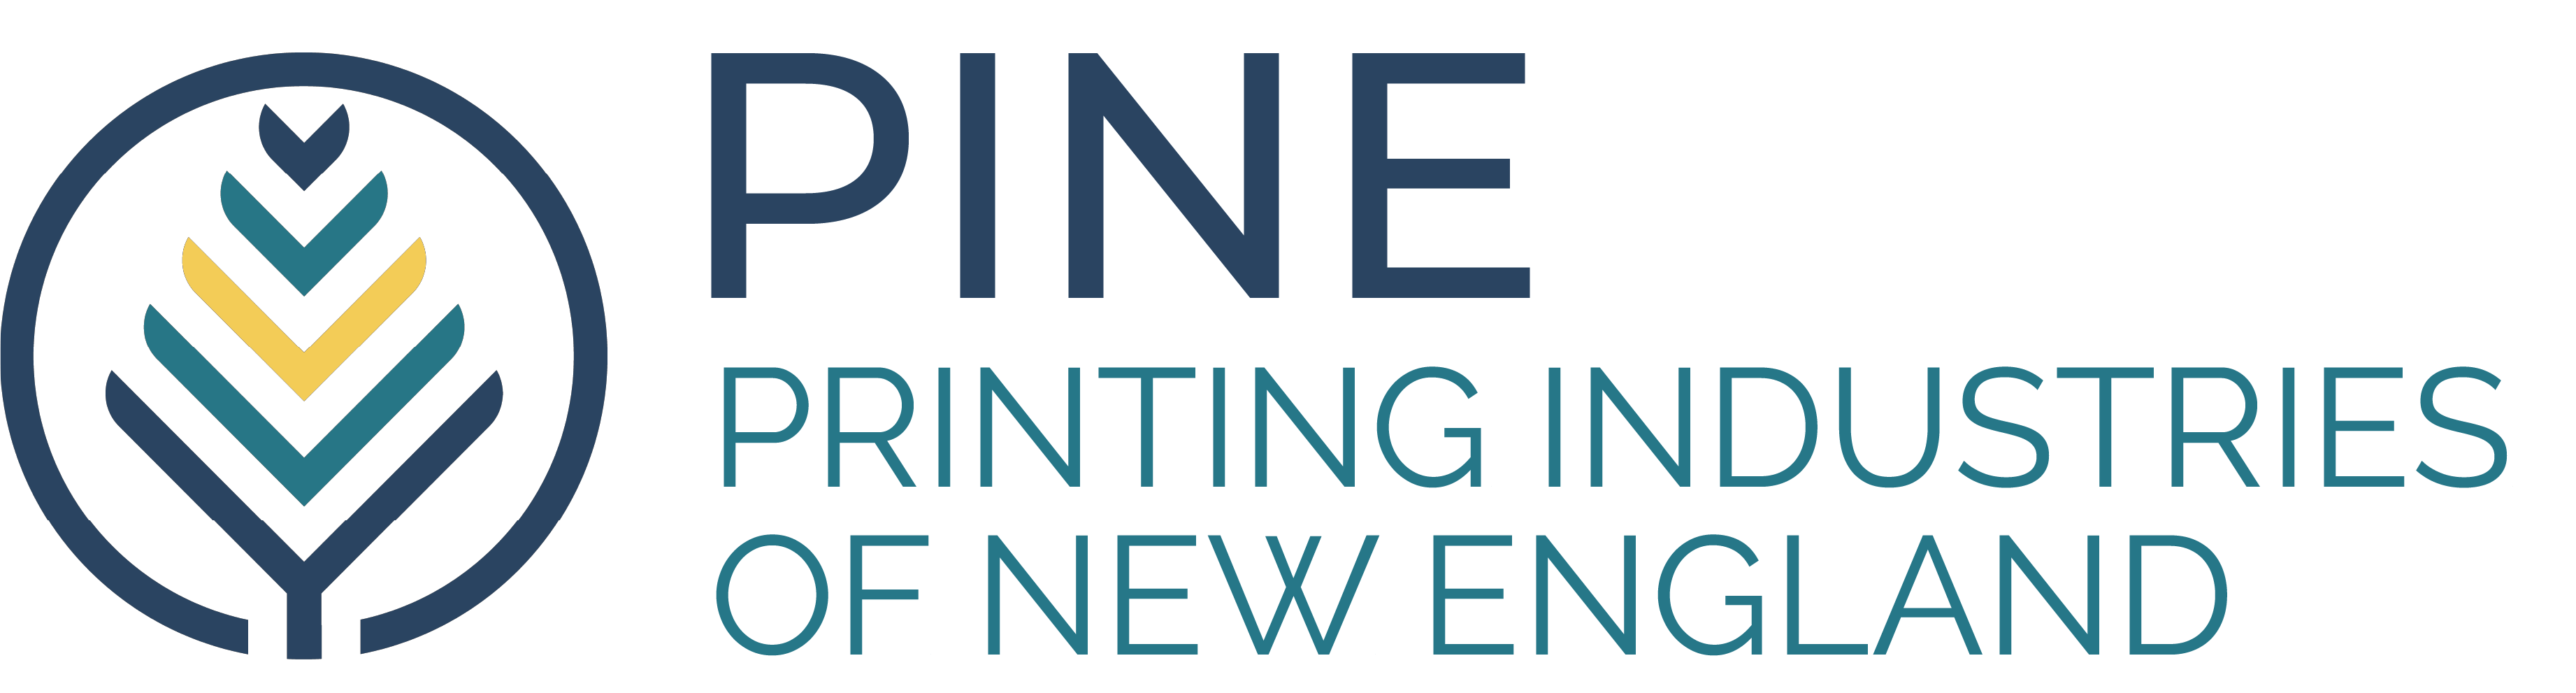 Printing Industries of New England